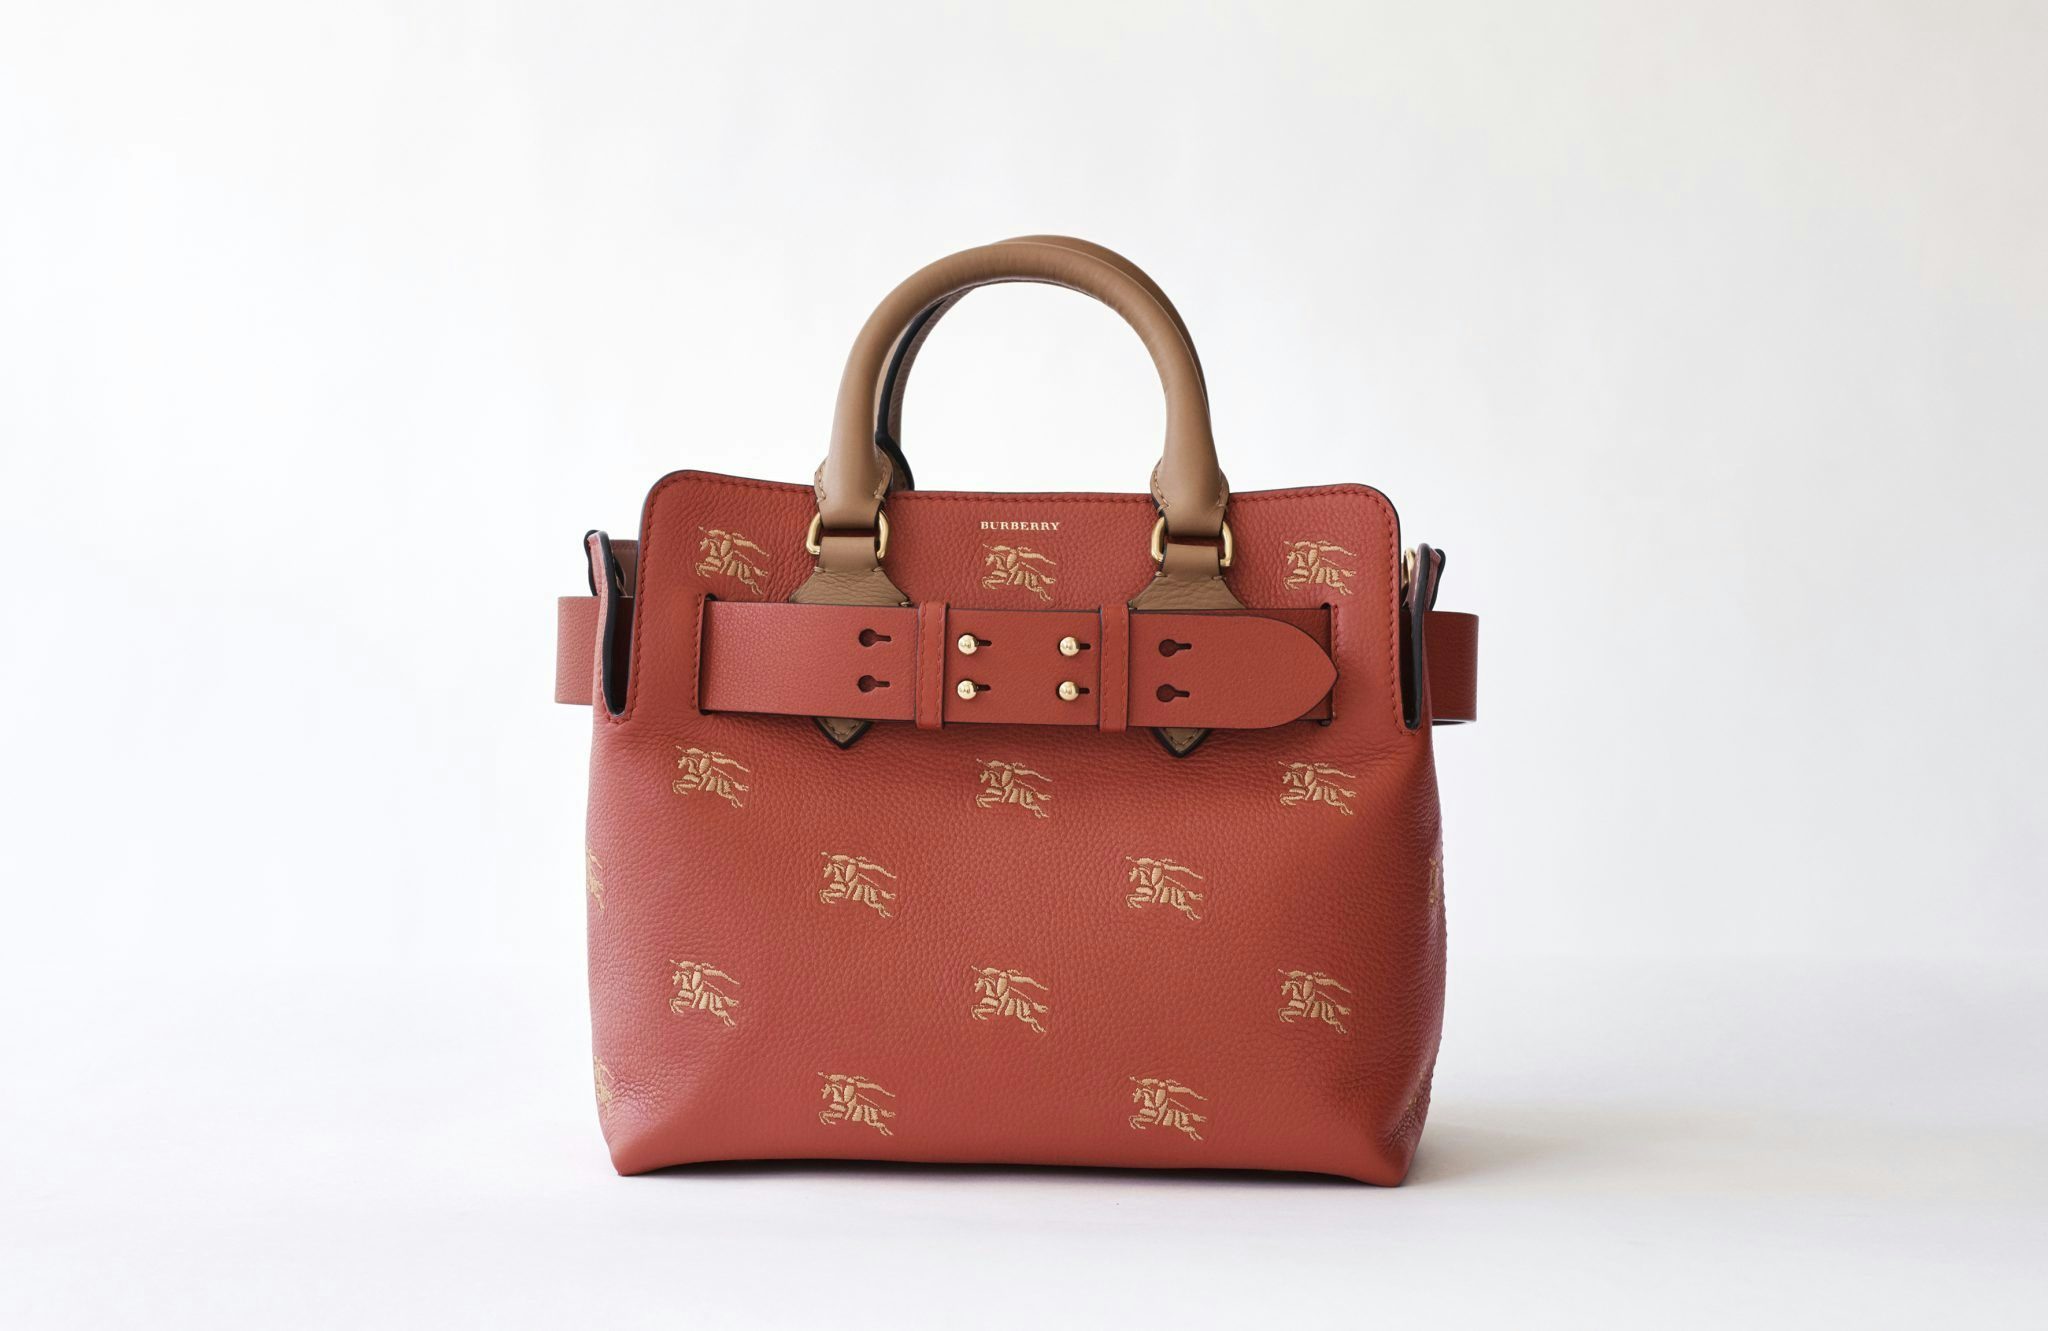 Exclusive: Burberry Launches 2 Handbags Just for China on First WeChat Mini-Program